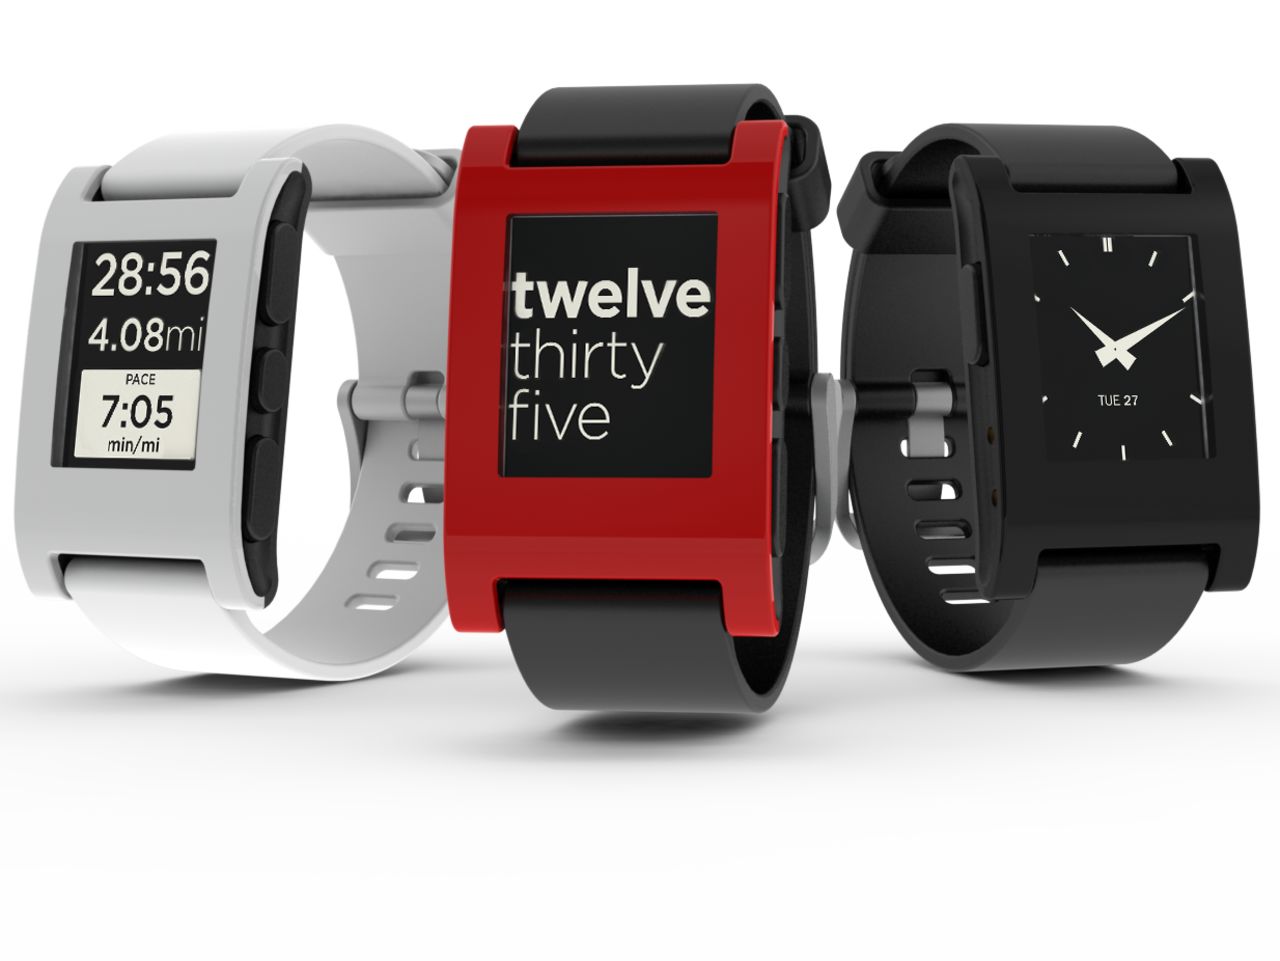 Pebble was a Kickstarter sensation and played a big role in getting the tech world excited about smartwatches. Models sell for around $150.